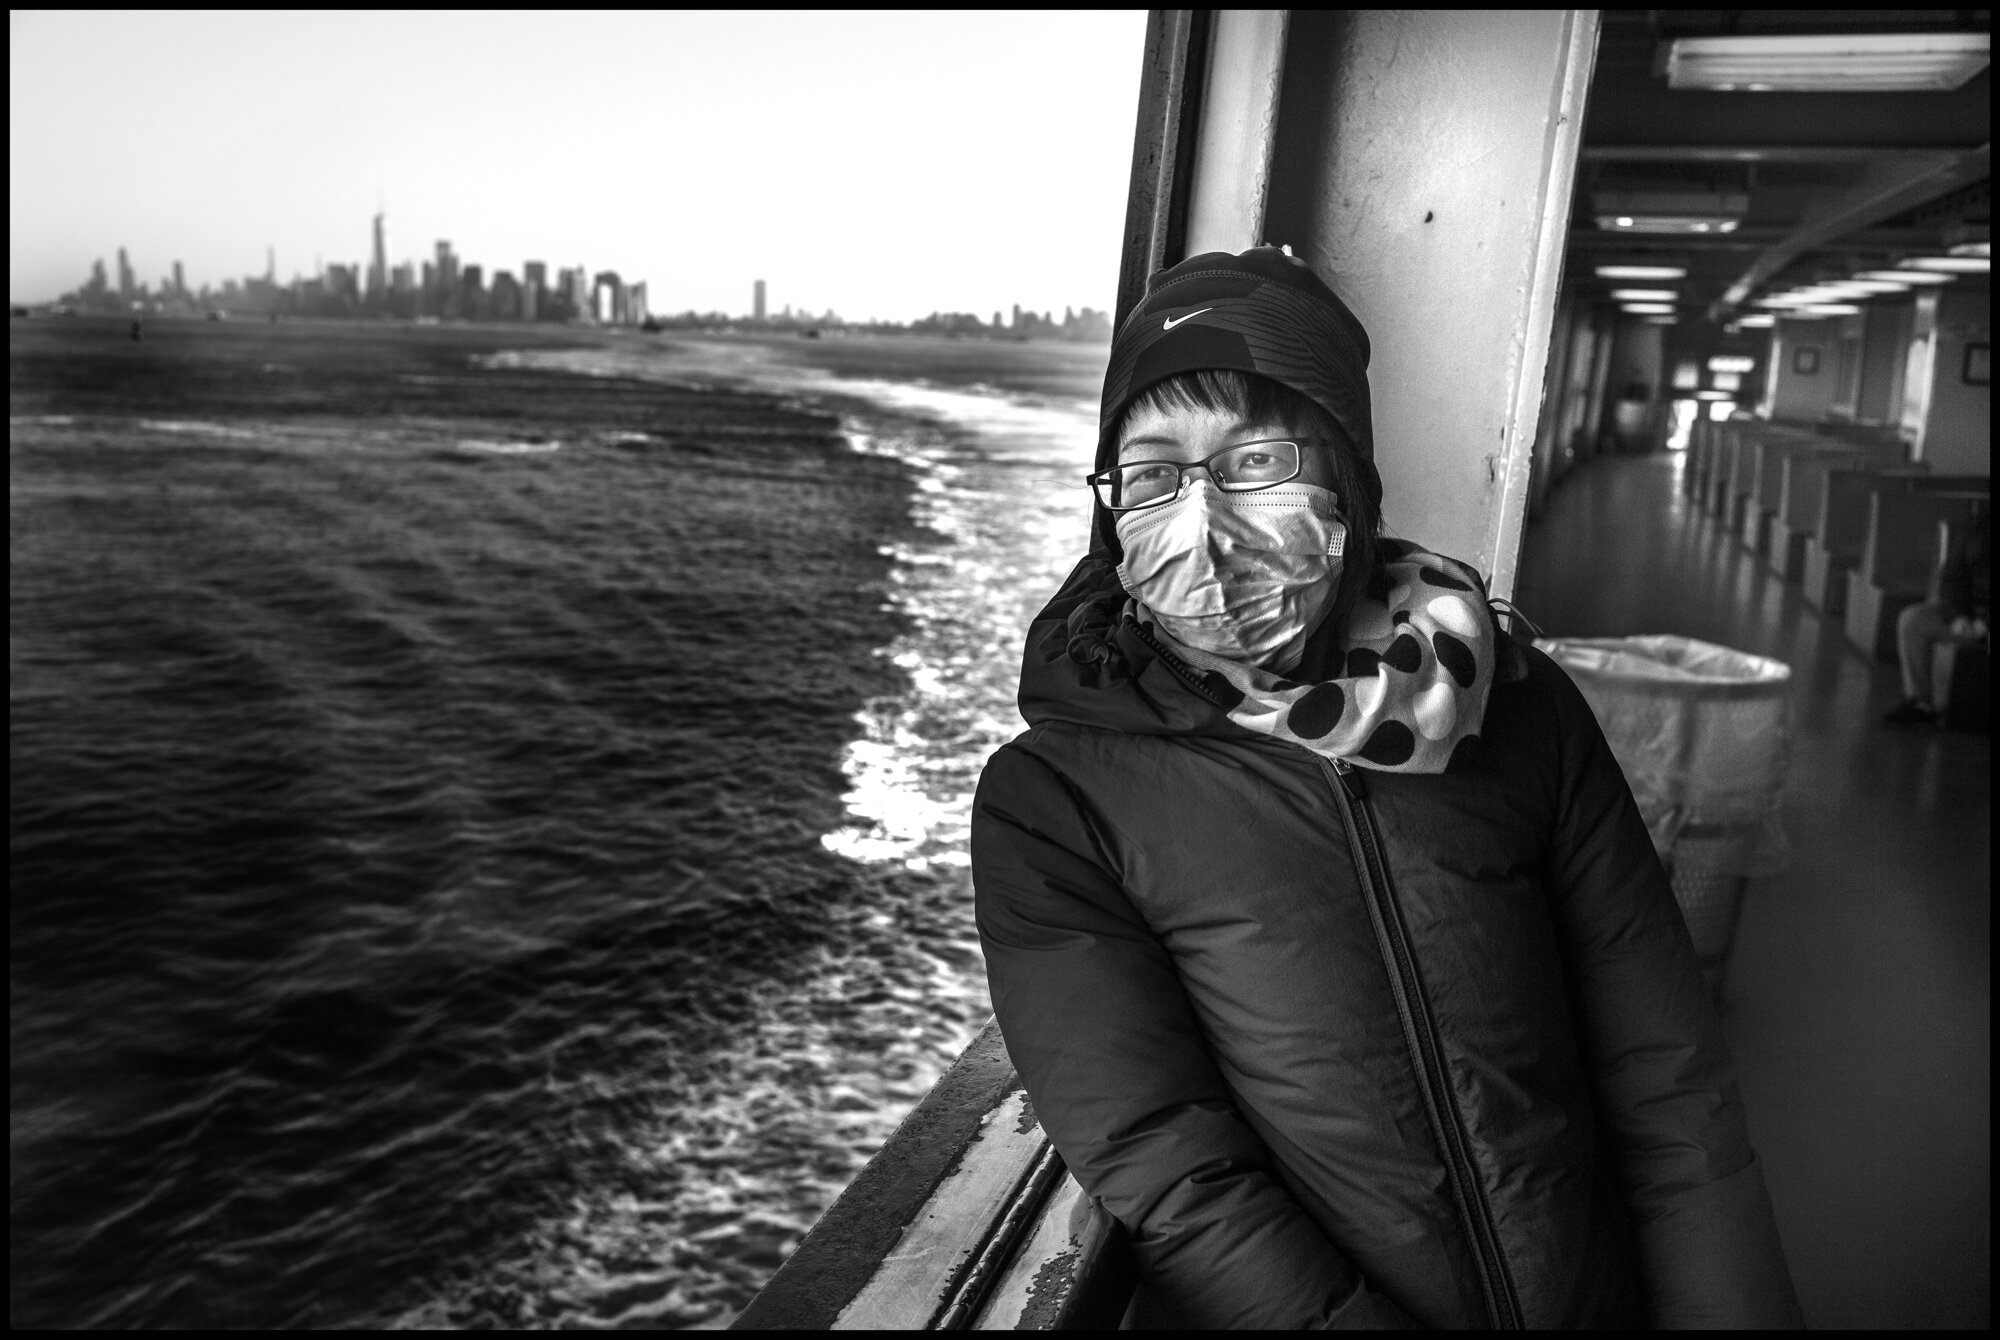  Lian, 44, is originally from China and told me she speaks very little English and works as a home attendant on Staten Island and takes the ferry daily there for her work.  March 26, 2020 ©Peter Turnley  ID# 04-009 